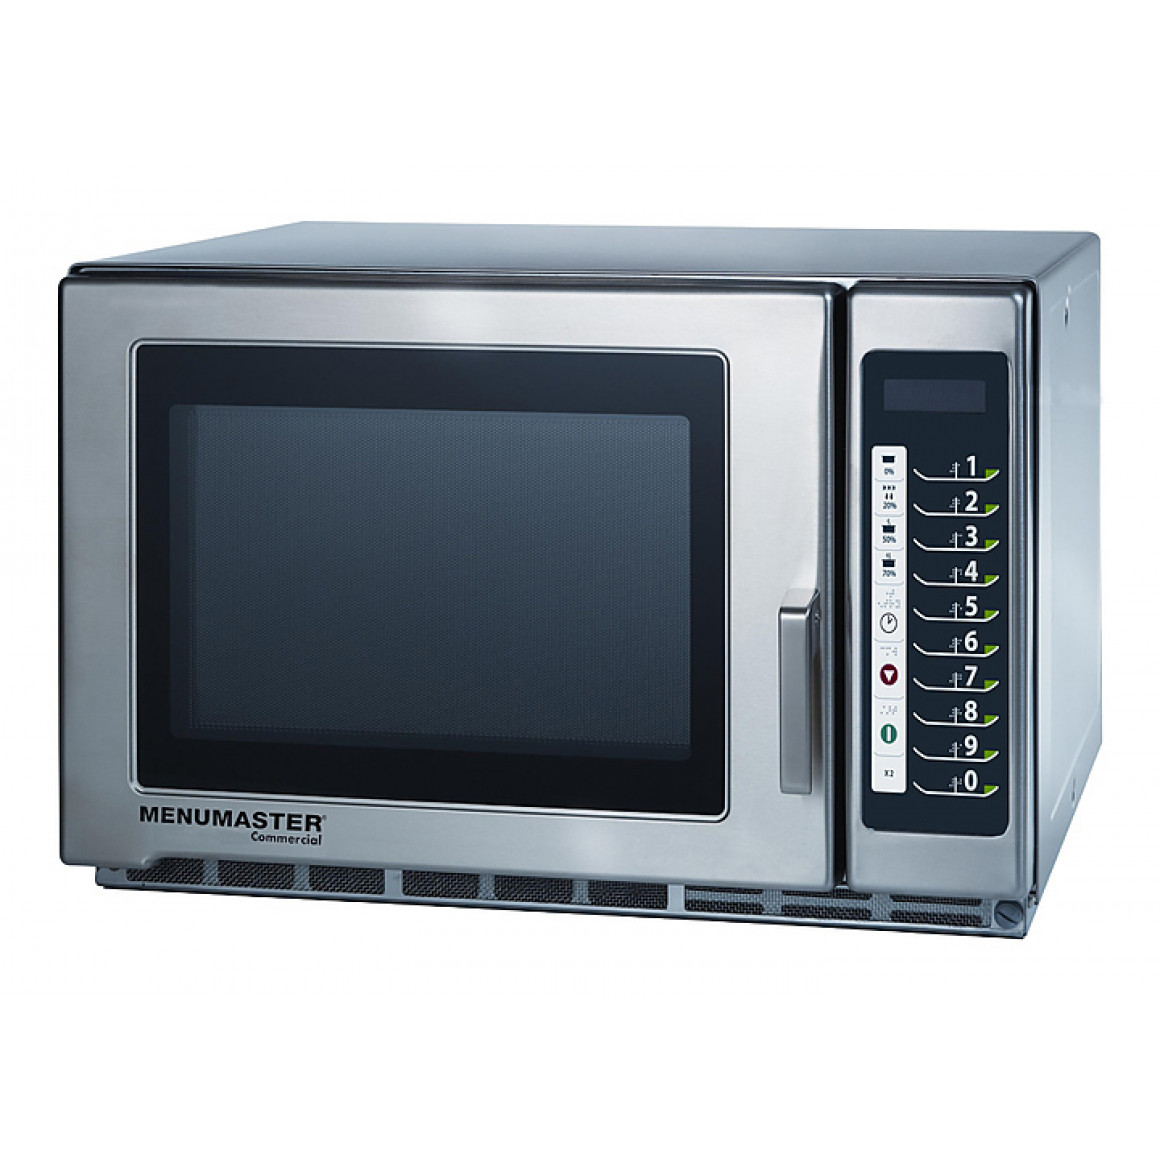 Microwave oven Commercial - CM743